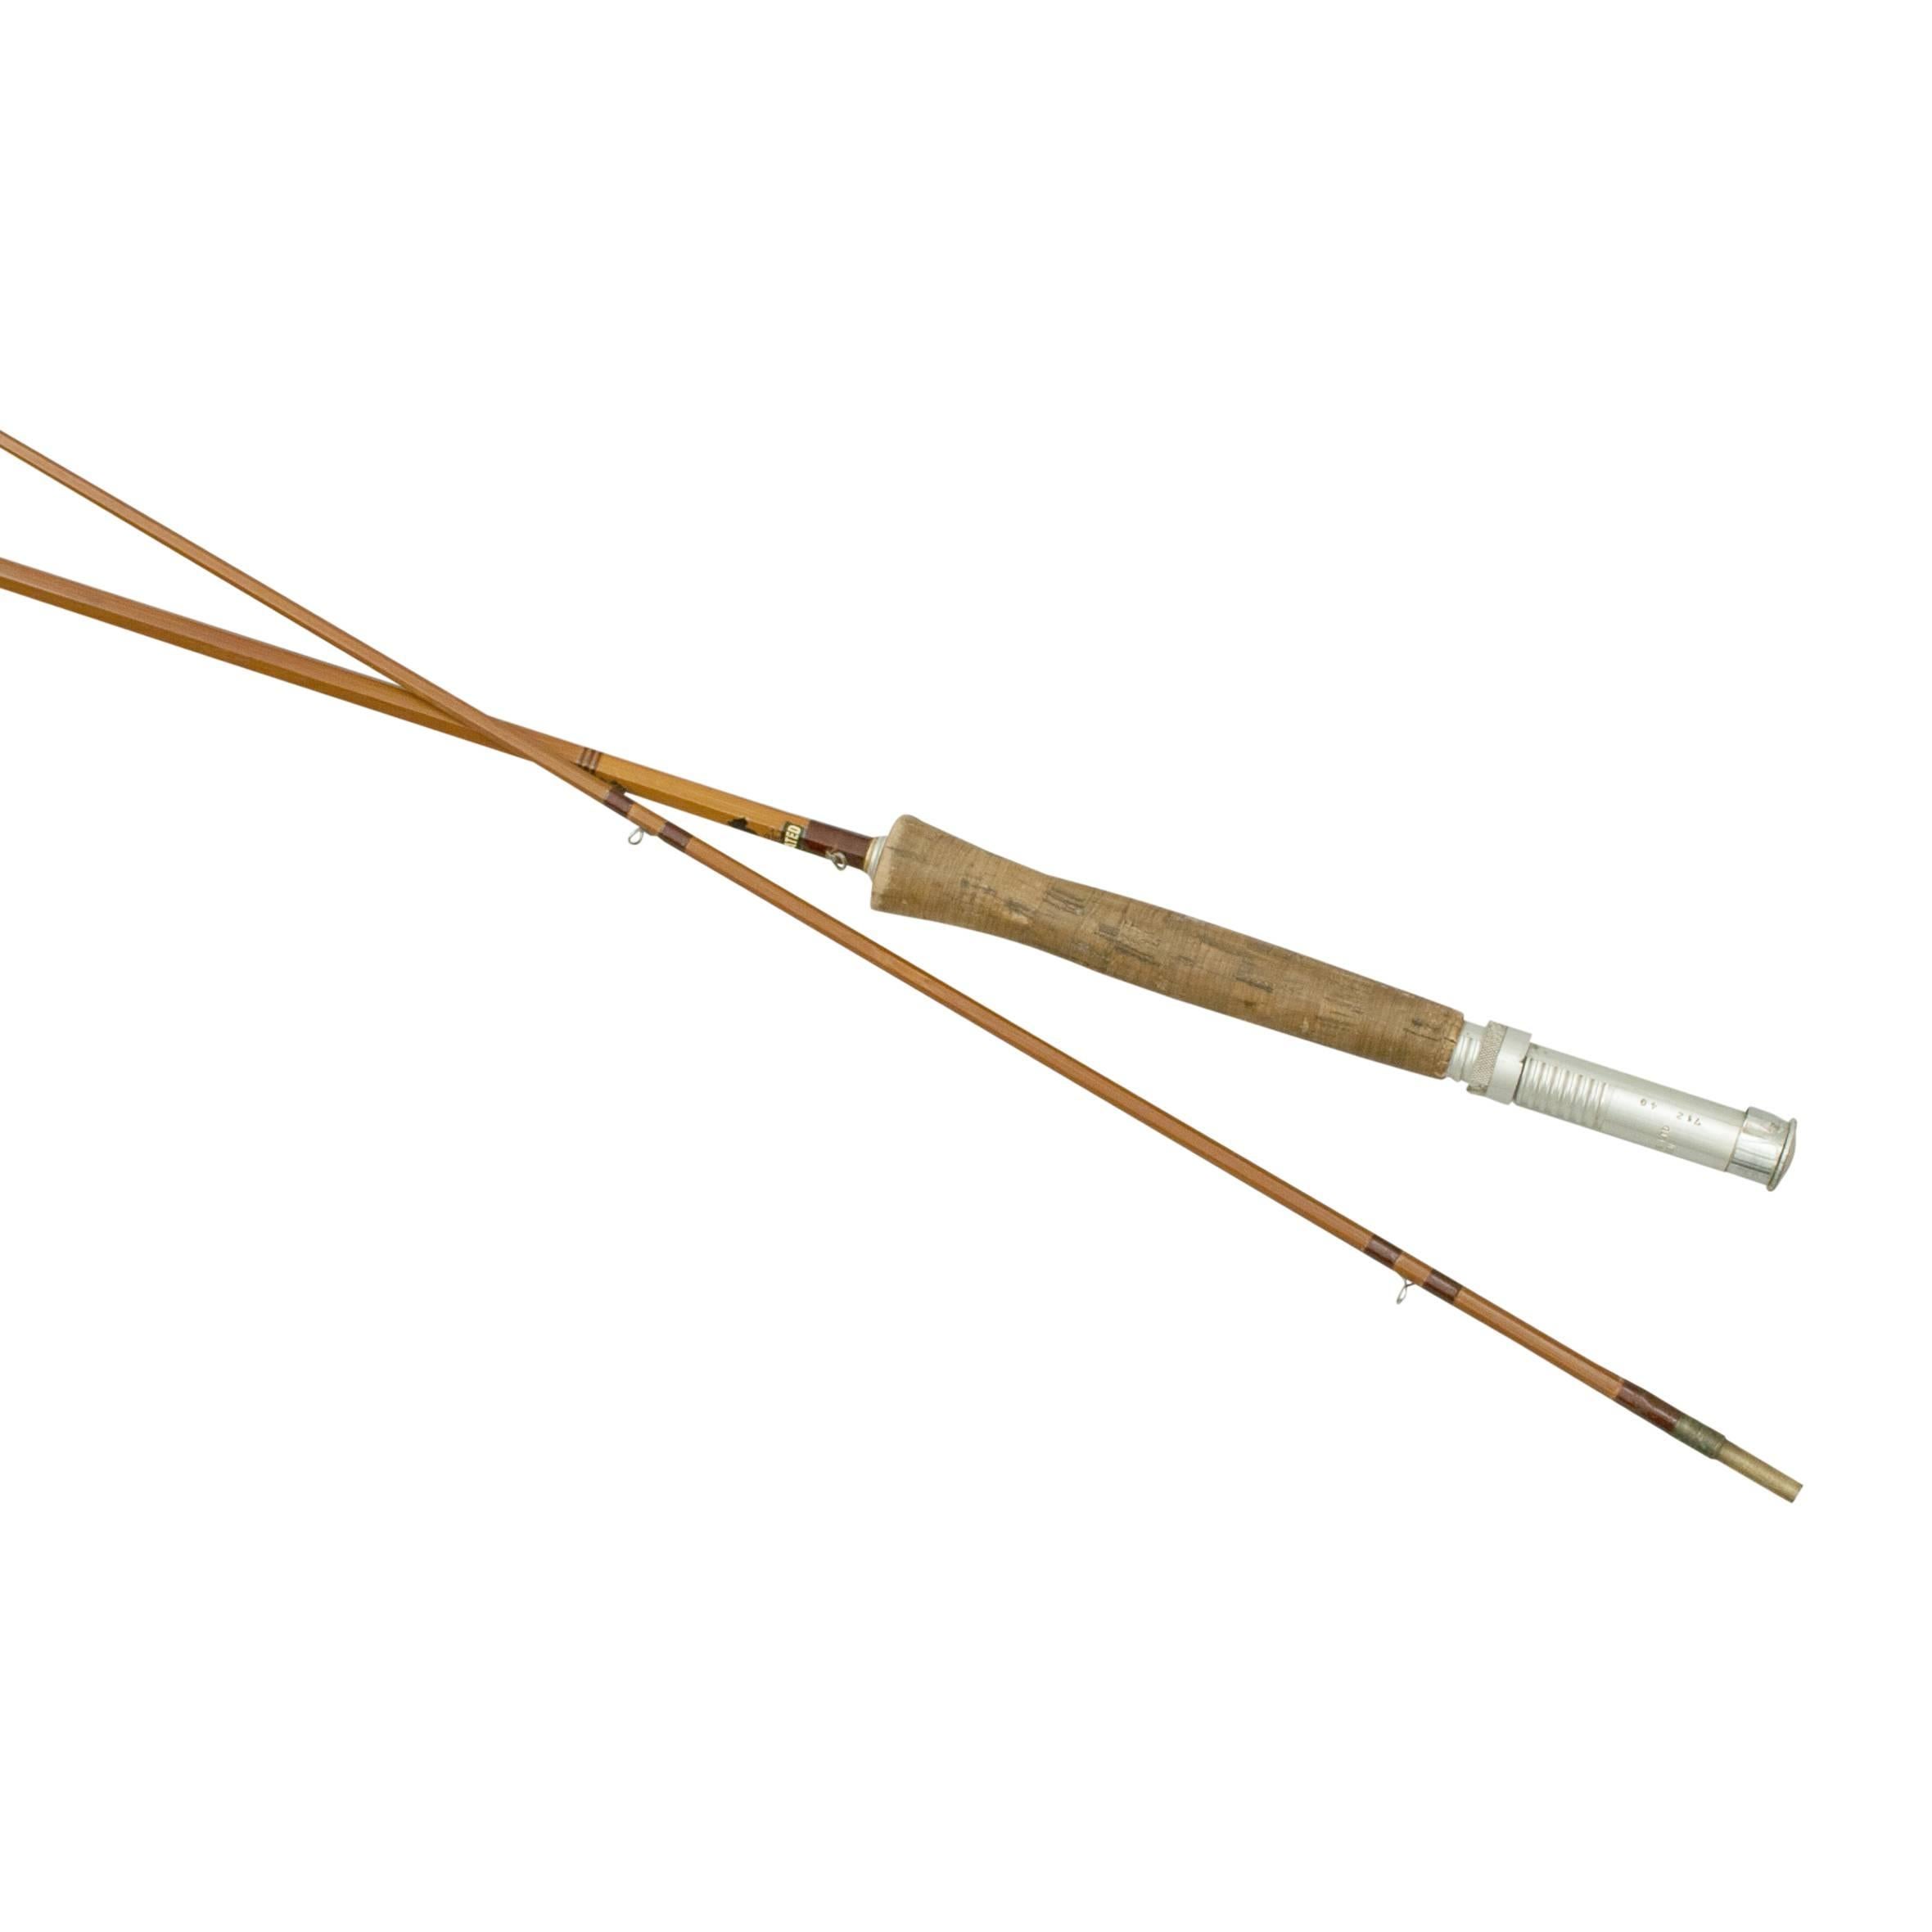 Trout fly fishing rod, The Merlin.
A fine 6ft, 2 piece split cane trout fly rod, The Merlin by Falcon of Redditch. The split bamboo brook rod is with suction joint, green whipped snake rings, alloy reel ring and cork handle. The inscription